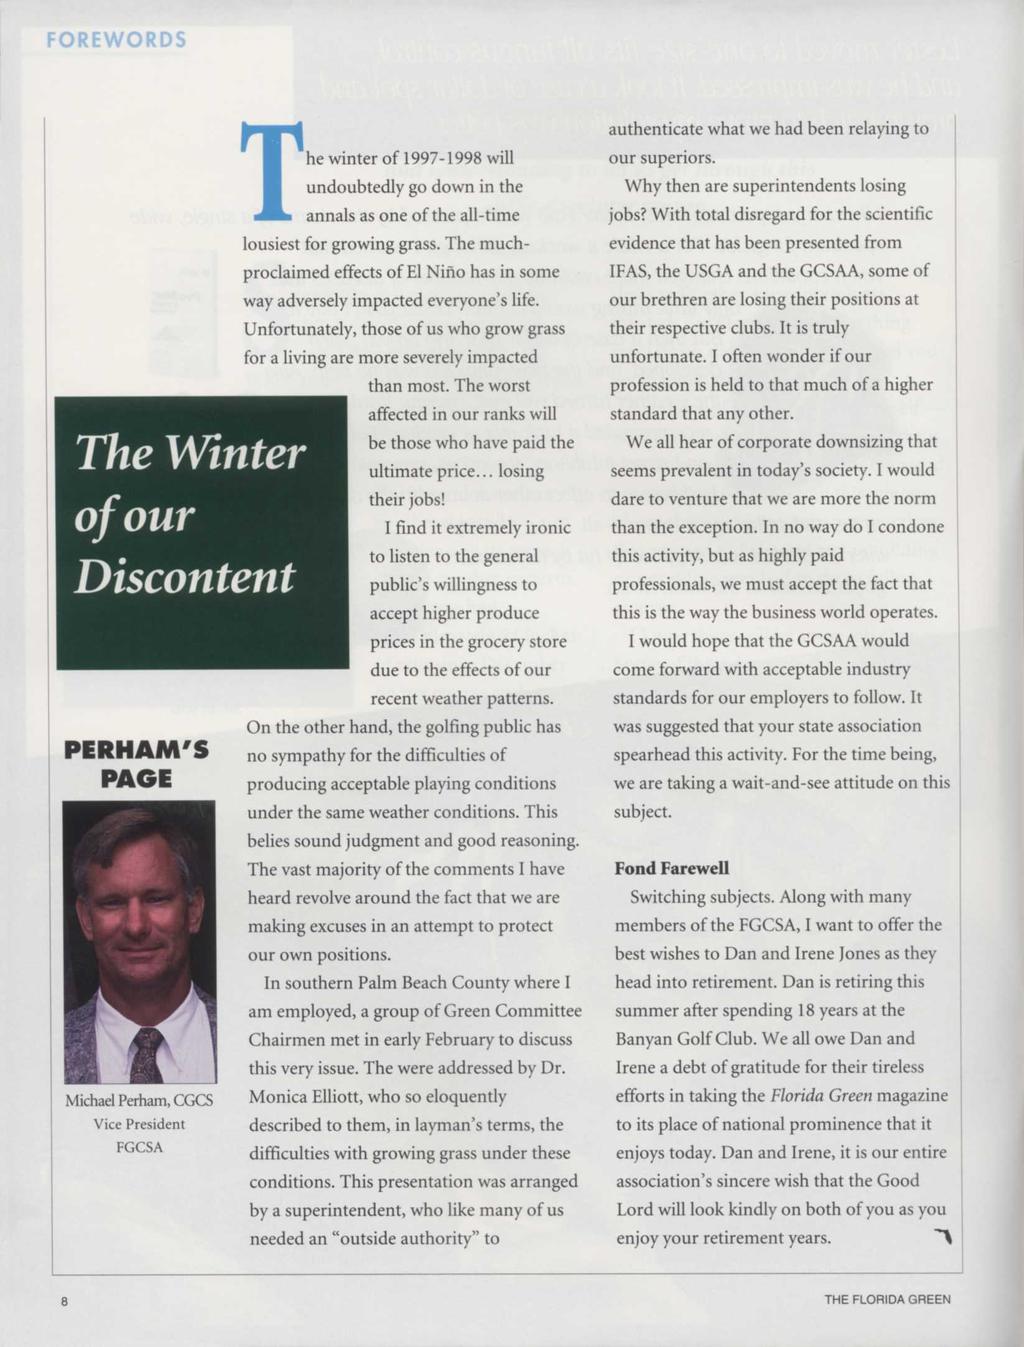 The Winter of our Discontent PERHAM'S PAGE Michael Perham, CGCS Vice President FGCSA The winter of 1997-1998 will undoubtedly go down in the annals as one of the all-time lousiest for growing grass.